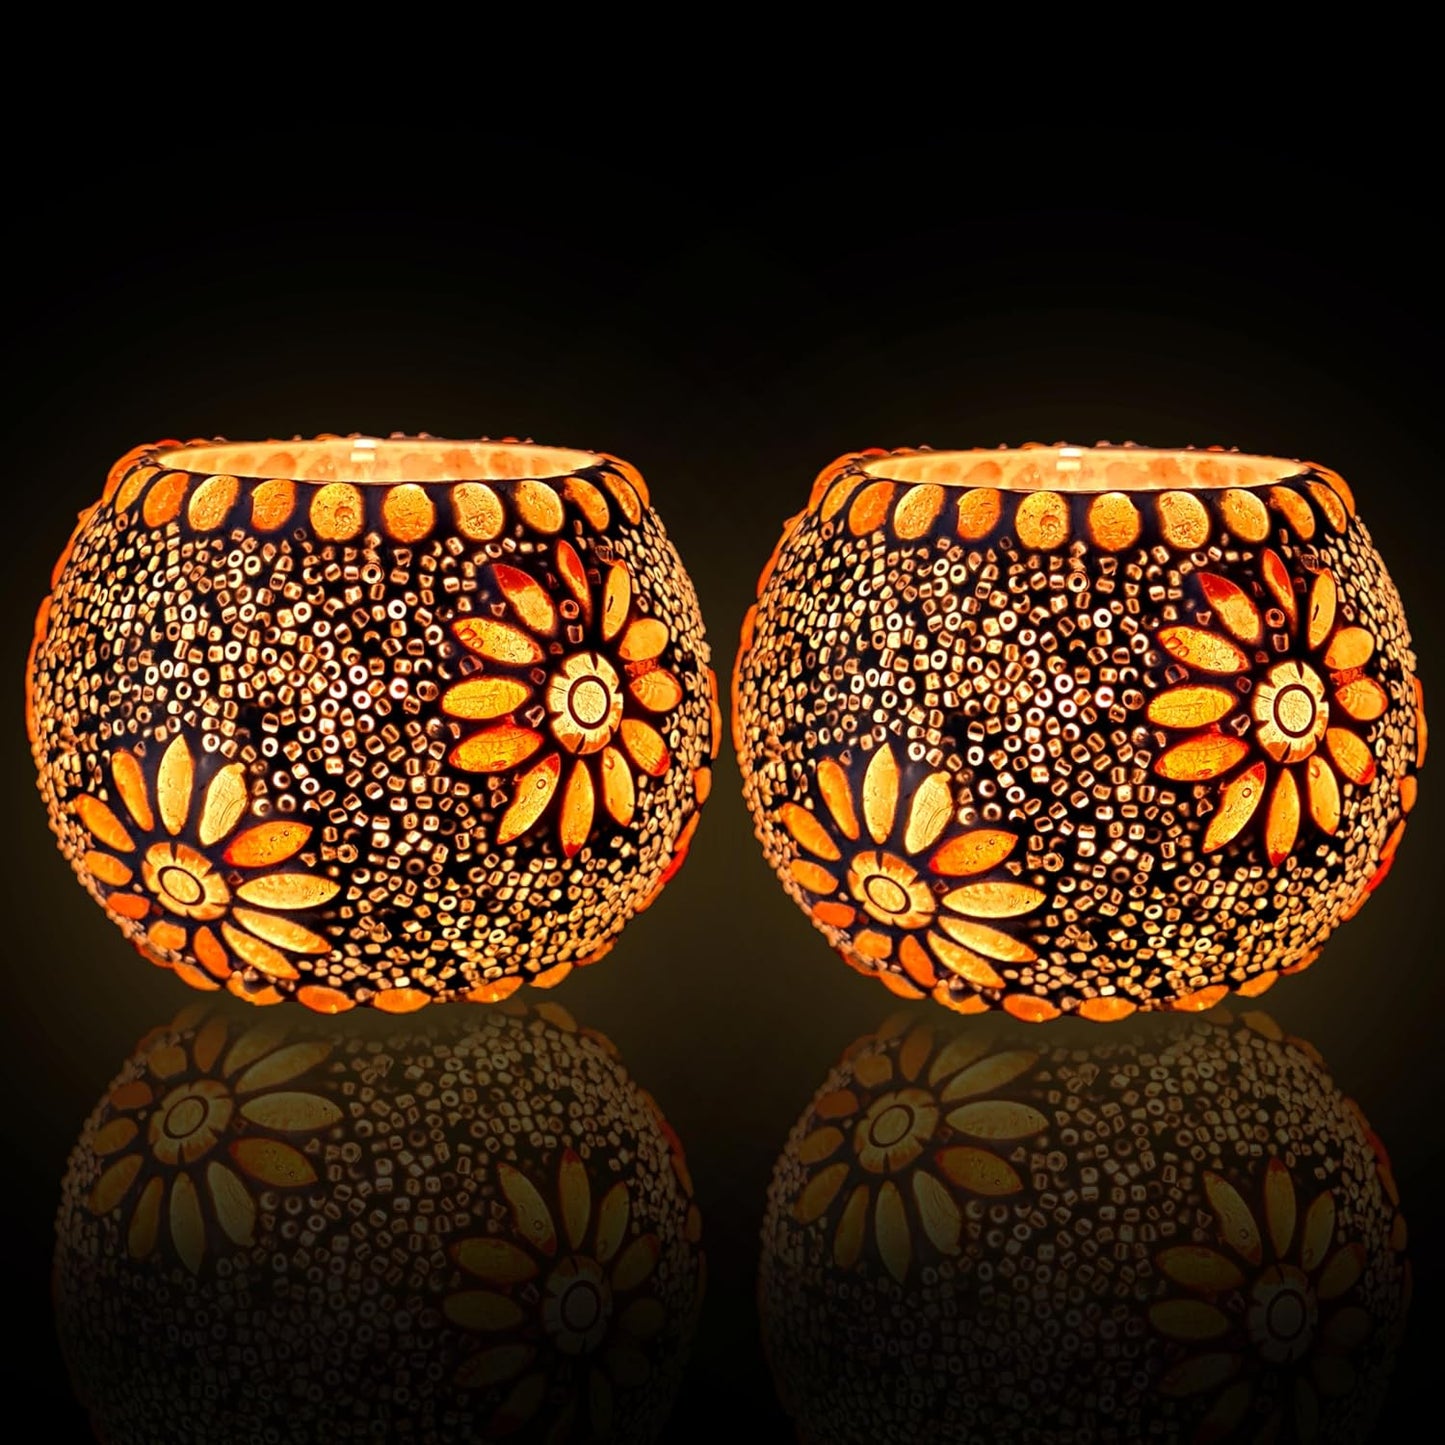 Two colorful decorative lamps with intricate designs.